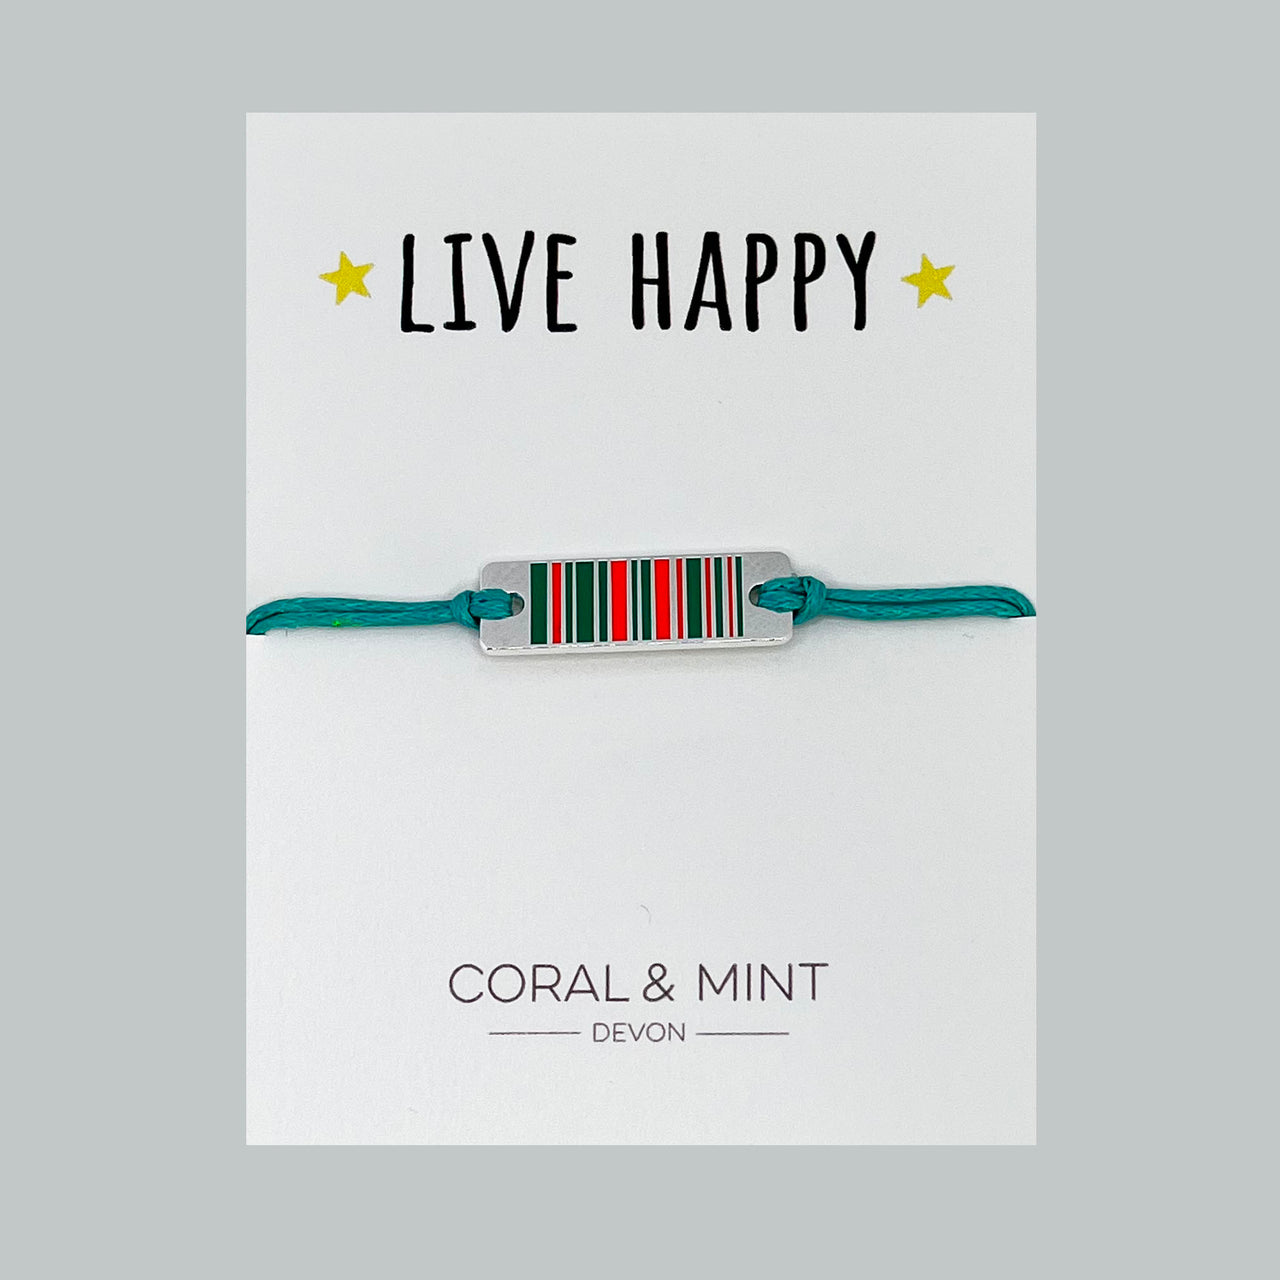 Live Happy - Mint and Coral Charm